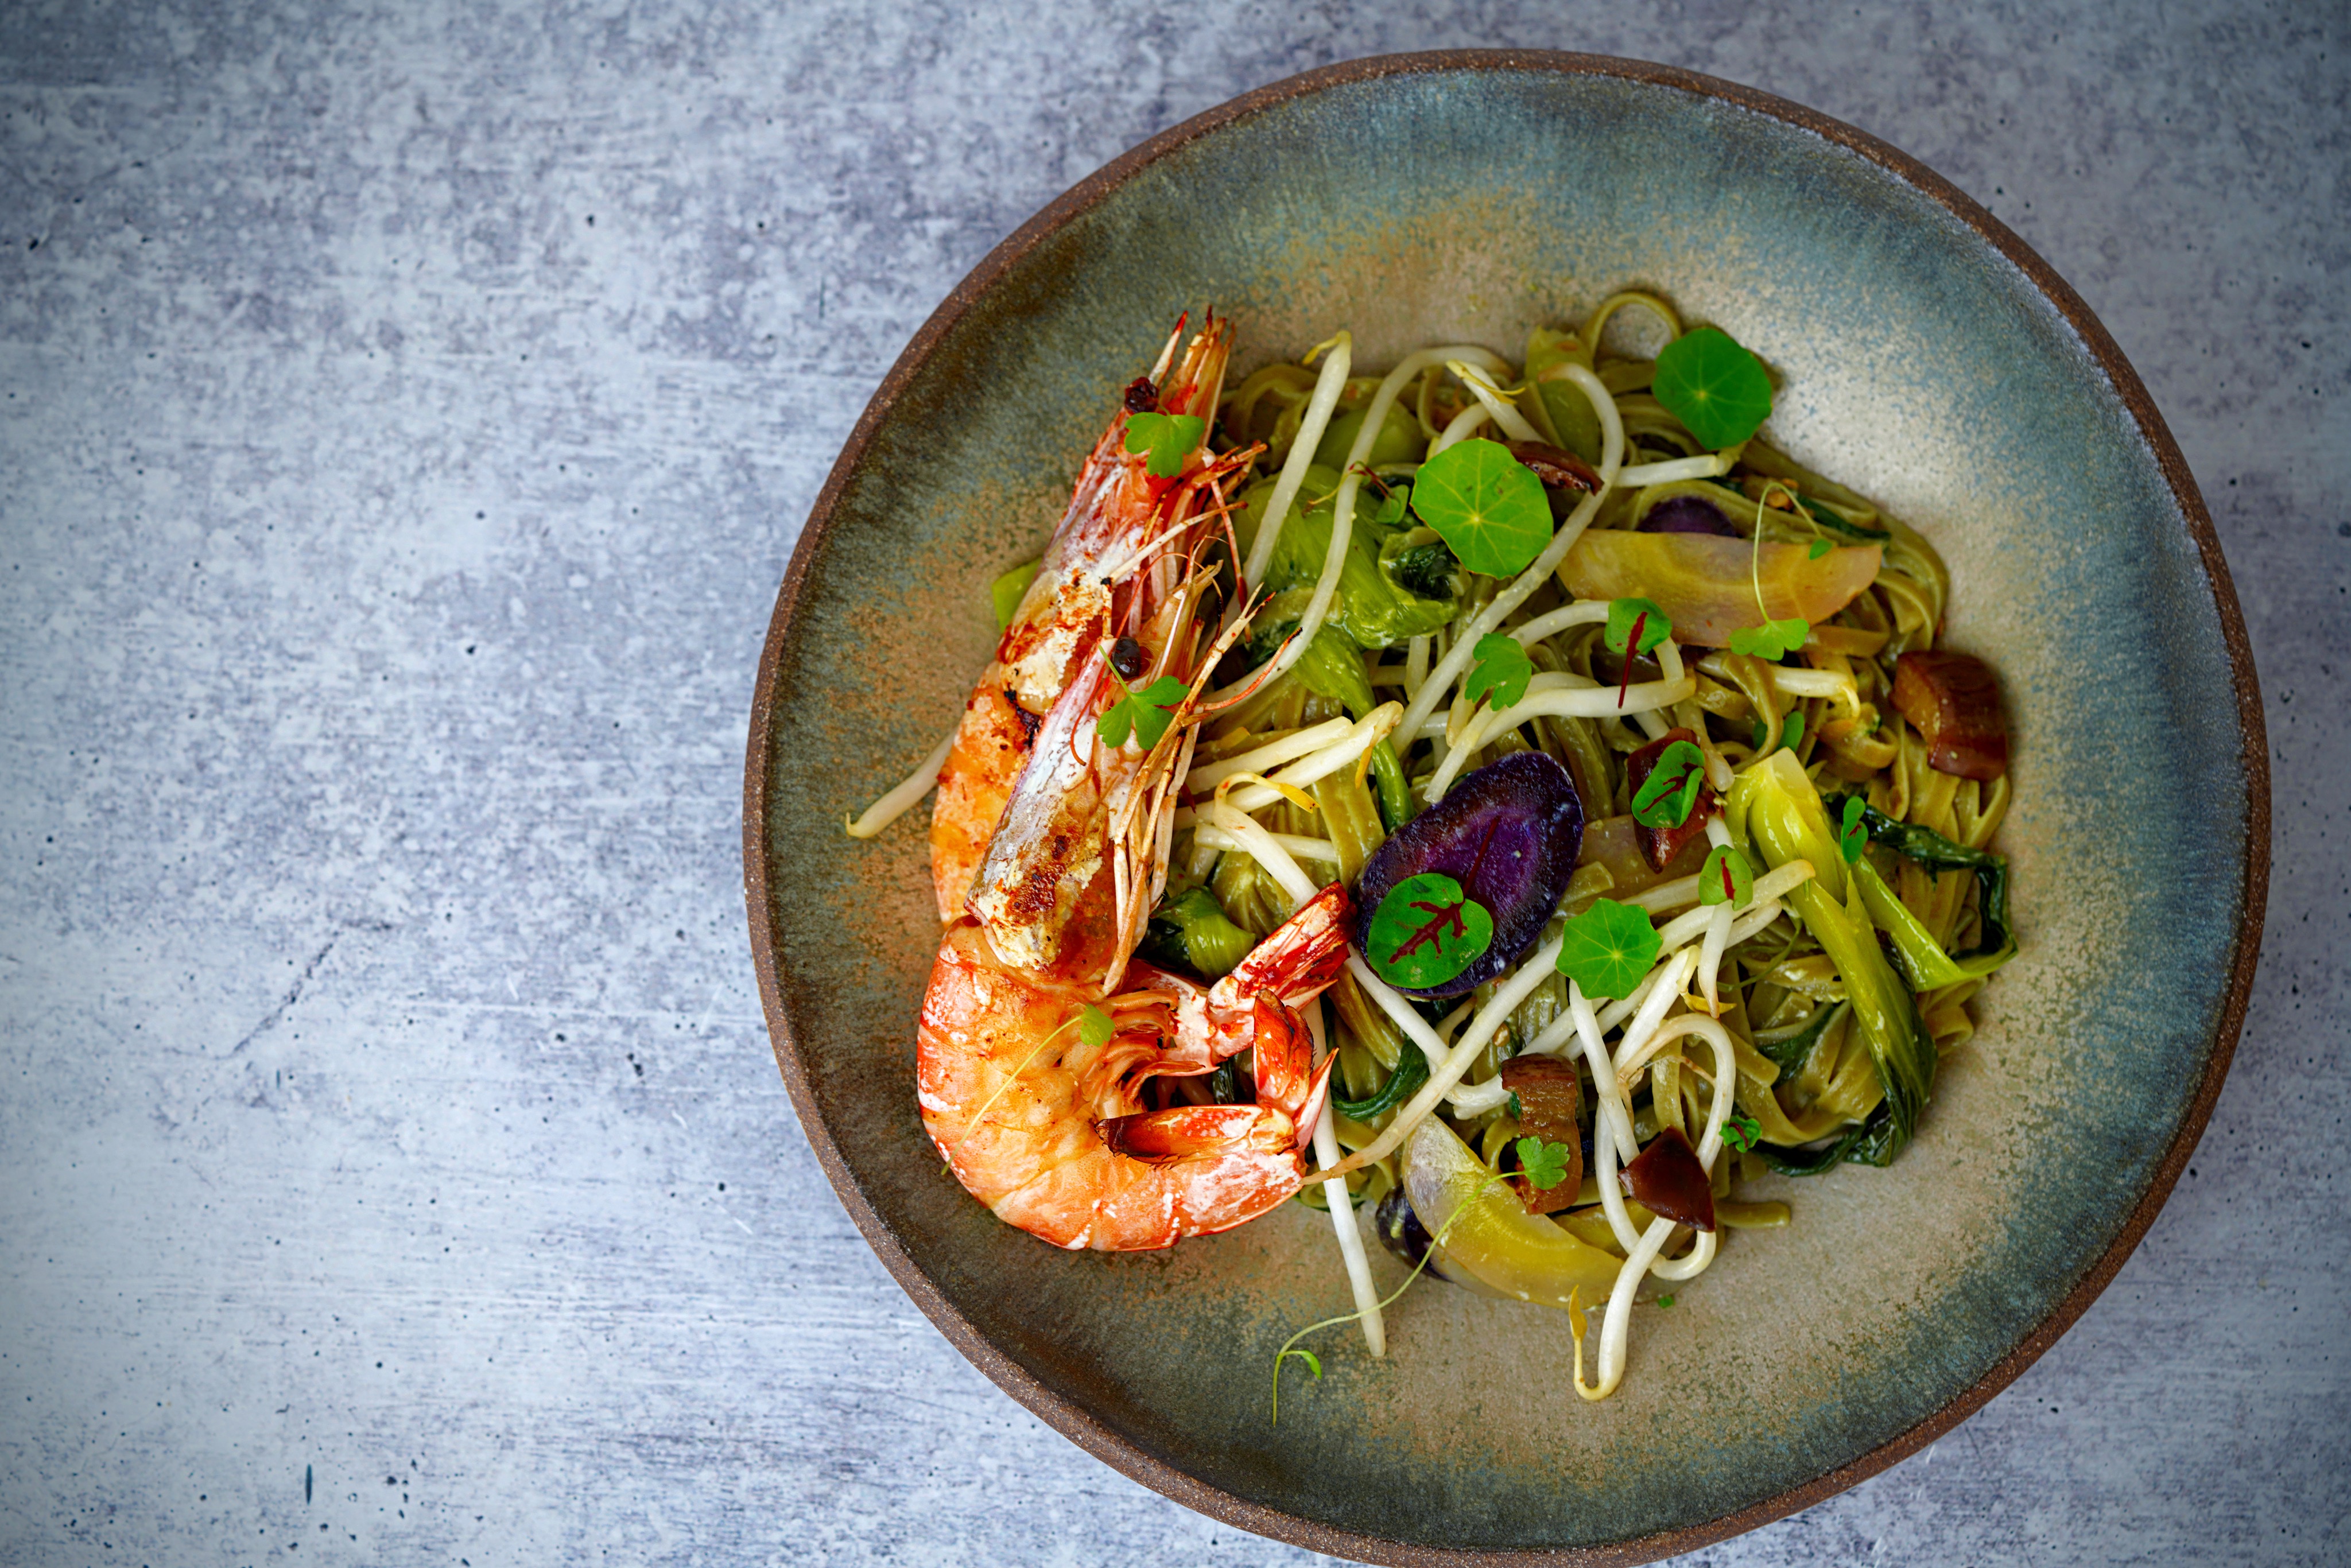 Rice Noodles Vegetables & Seared Gulf Prawns